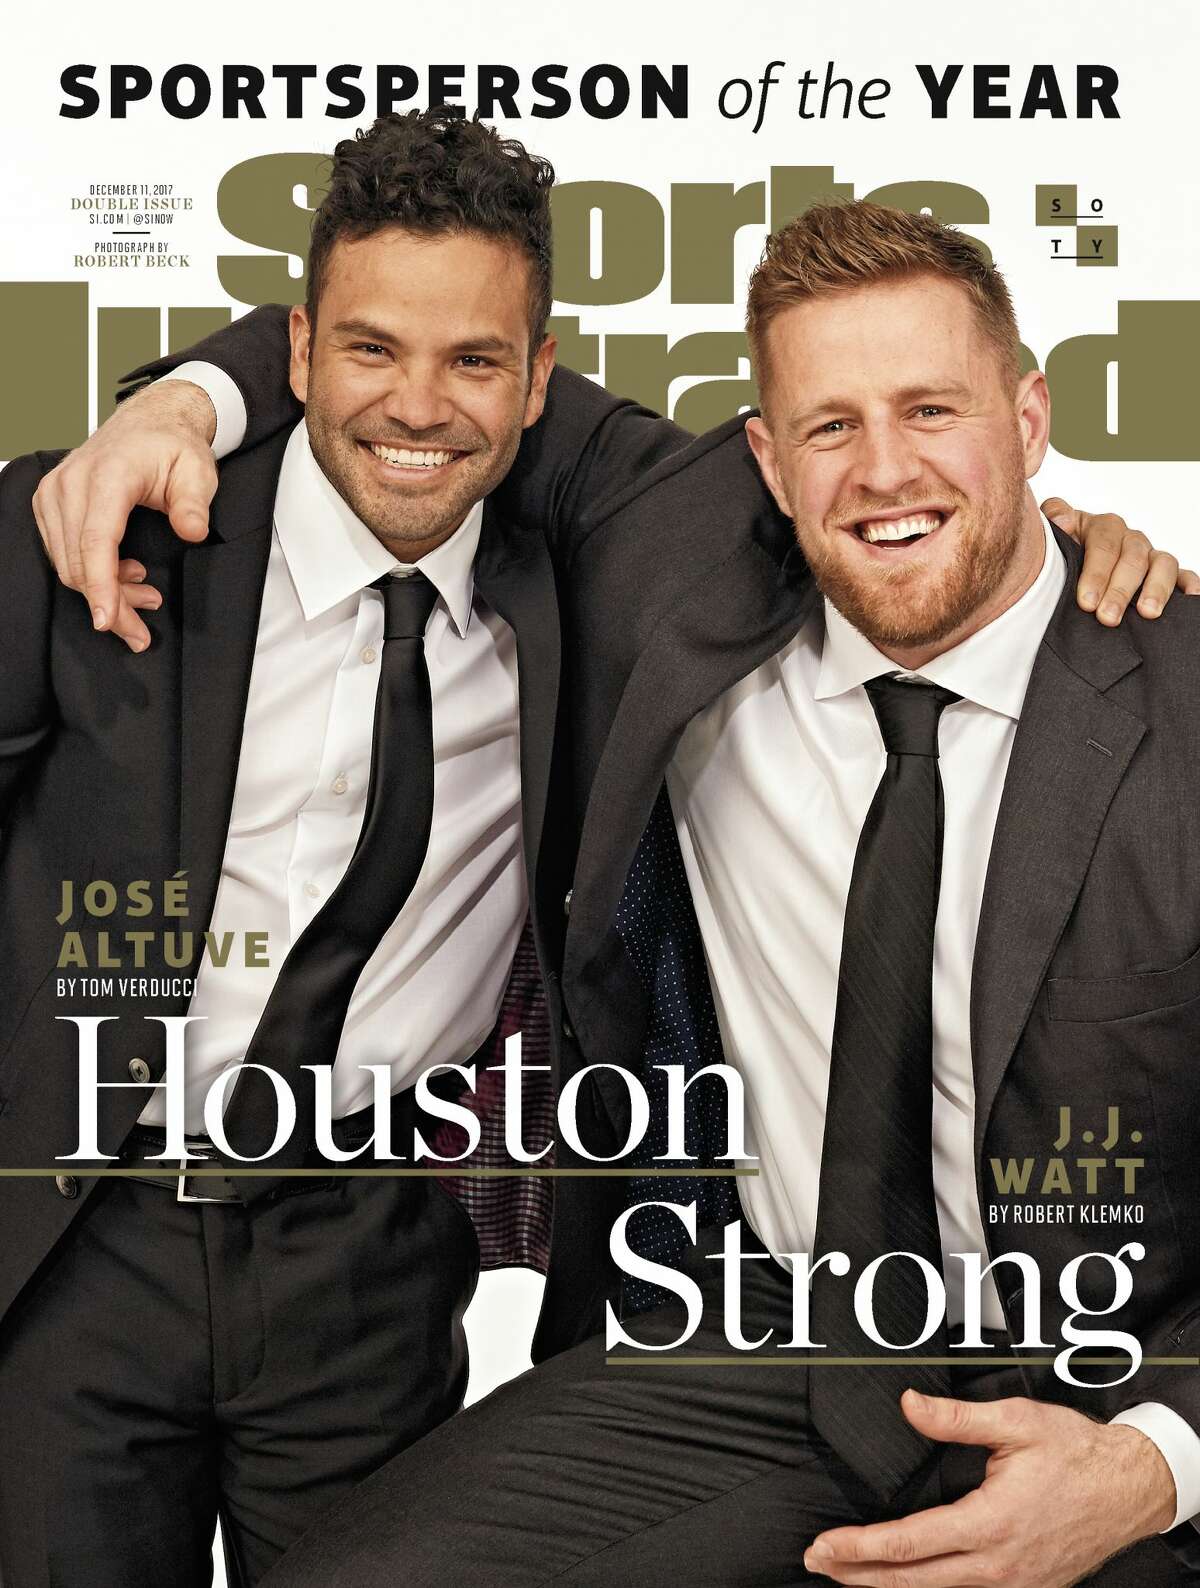 PHOTOS: Sports Illustrated Sportsperson of the Year through the years and Watt's appearance on NBC's "The Tonight Show Starring Jimmy Fallon" on Monday night. Sports Illustrated has named the Astros' J.J. Watt and the Texans' J.J. Watt as Sportspersons of the Year for 2017. The magazine will hit newsstands later this month.